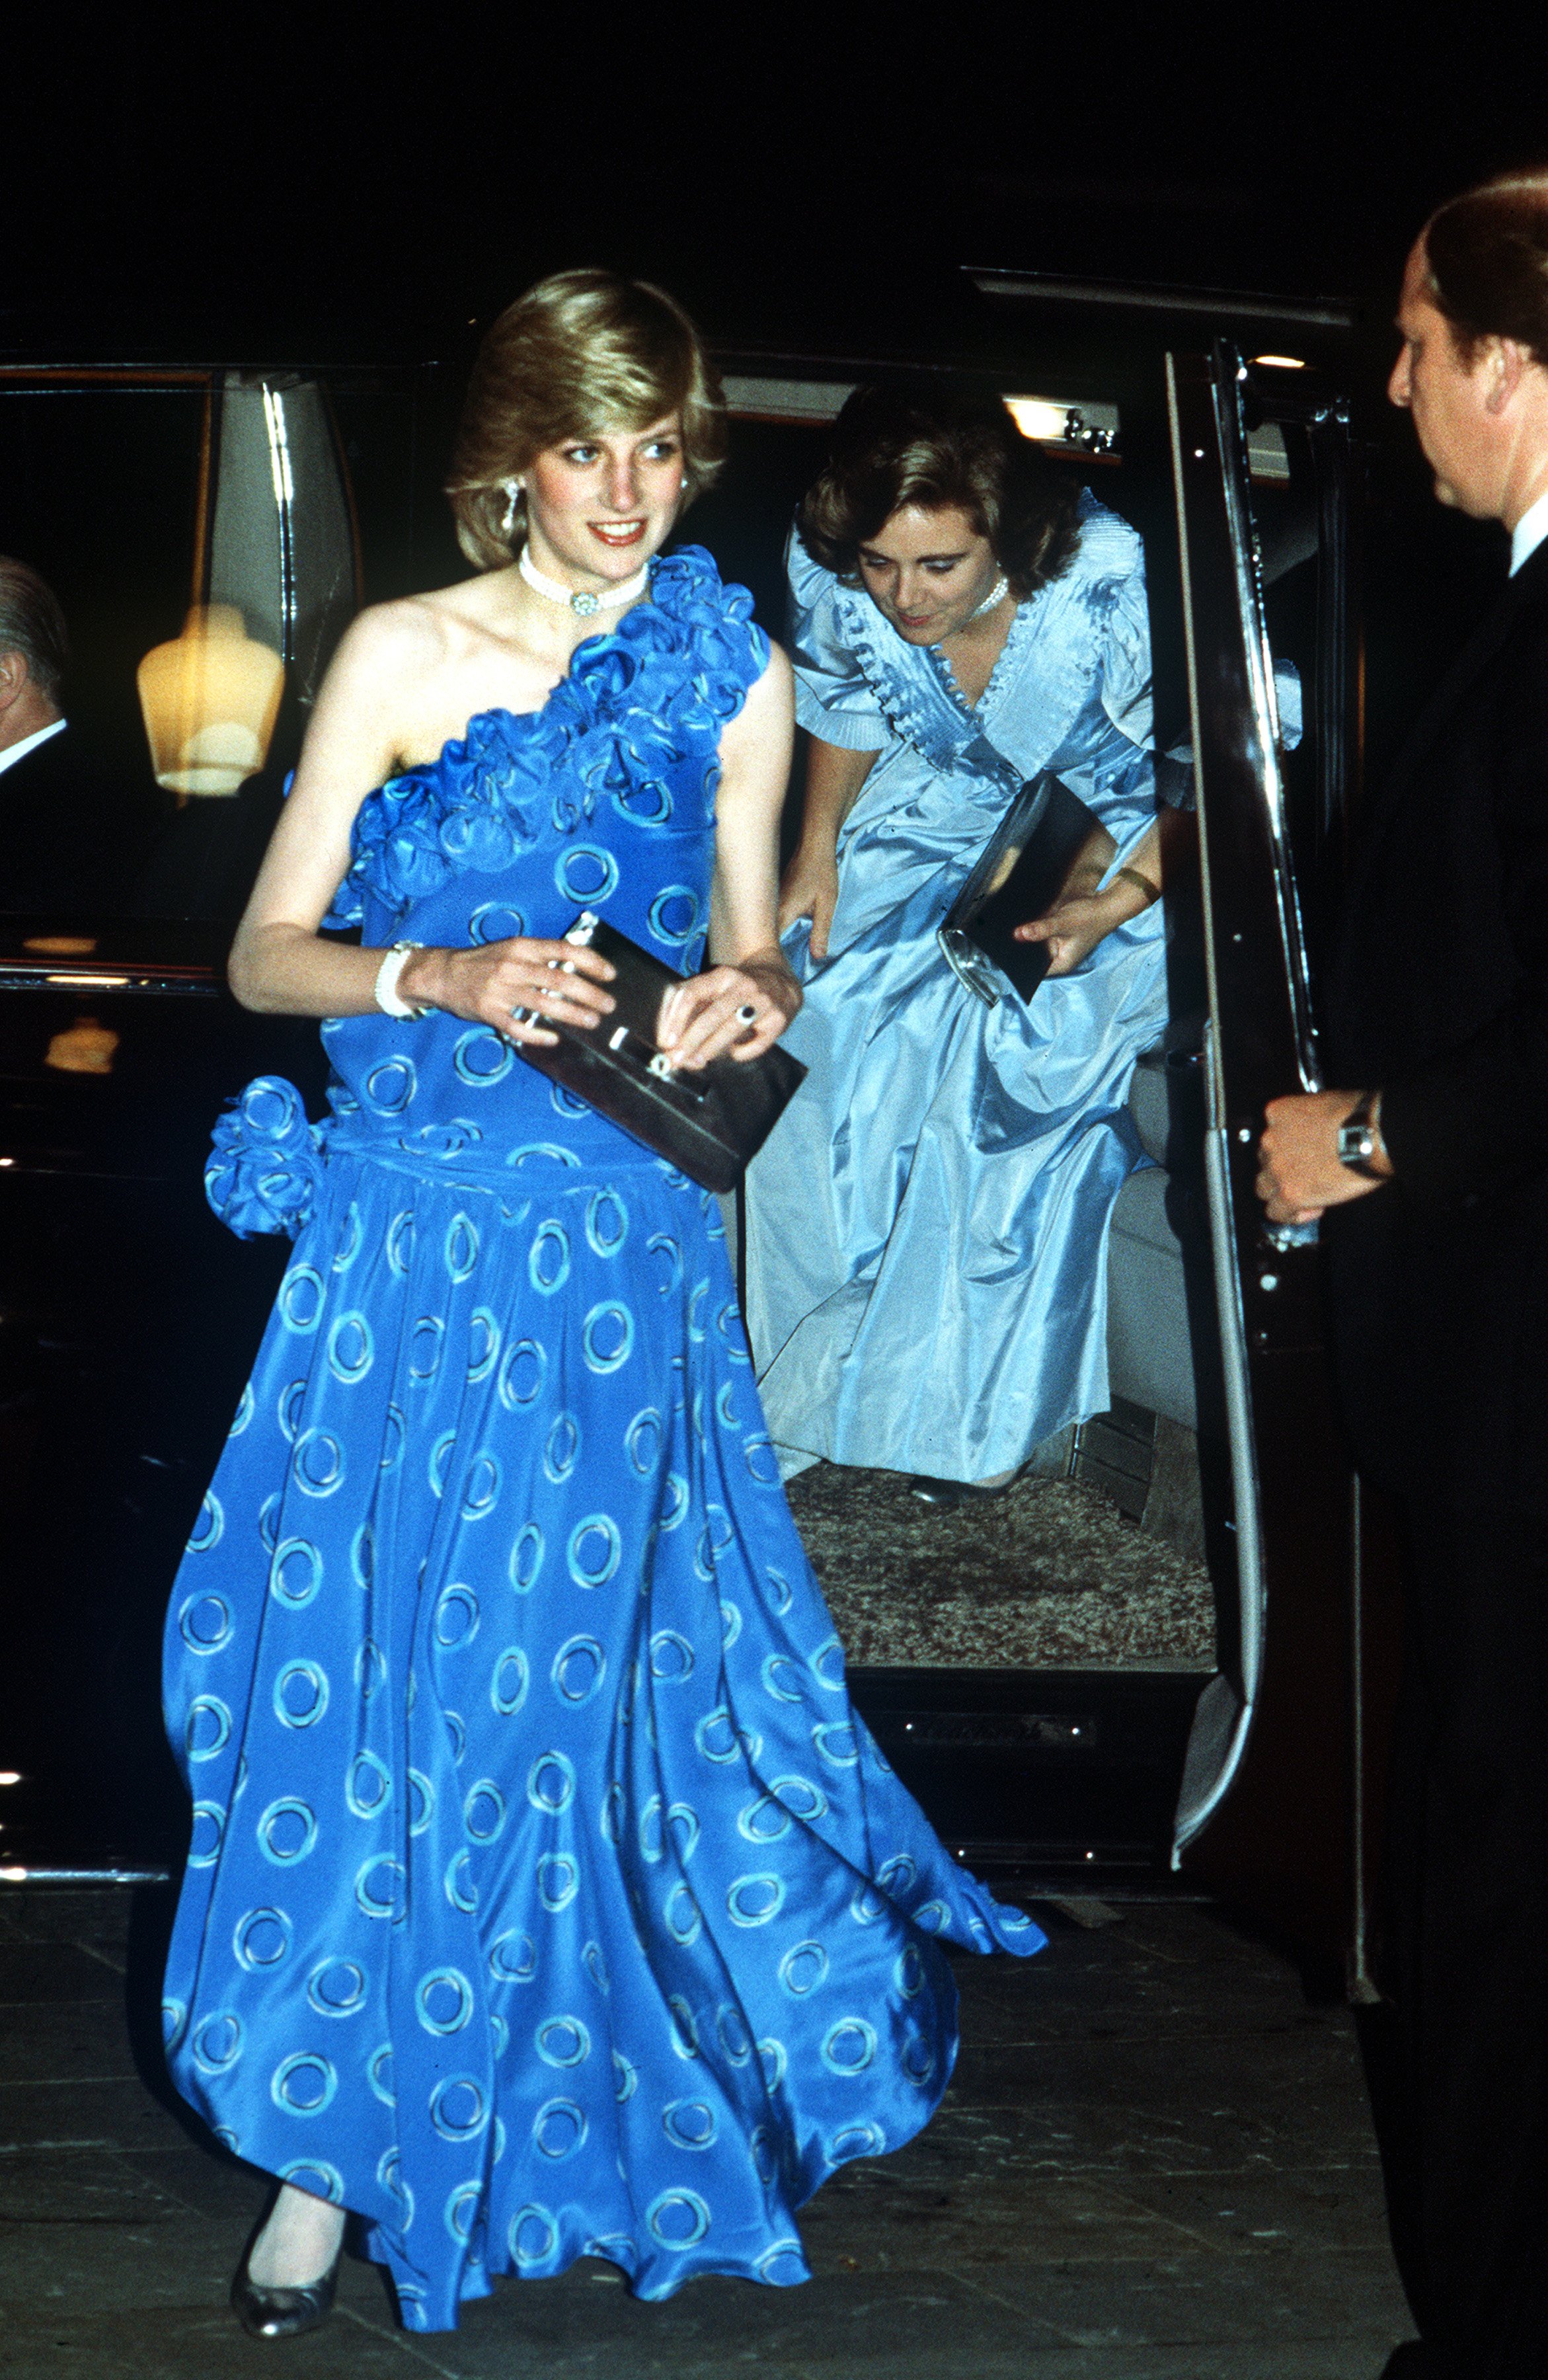 The Princess of Wales arrives at the Guildhall in London for a fashion show, November 1982. She is wearing a blue dress by Bruce Oldfield. She is accompanied by her lady-in-waiting Anne Beckwith-Smith. (Photo by Jayne Fincher/Princess Diana Archive/Getty Images)